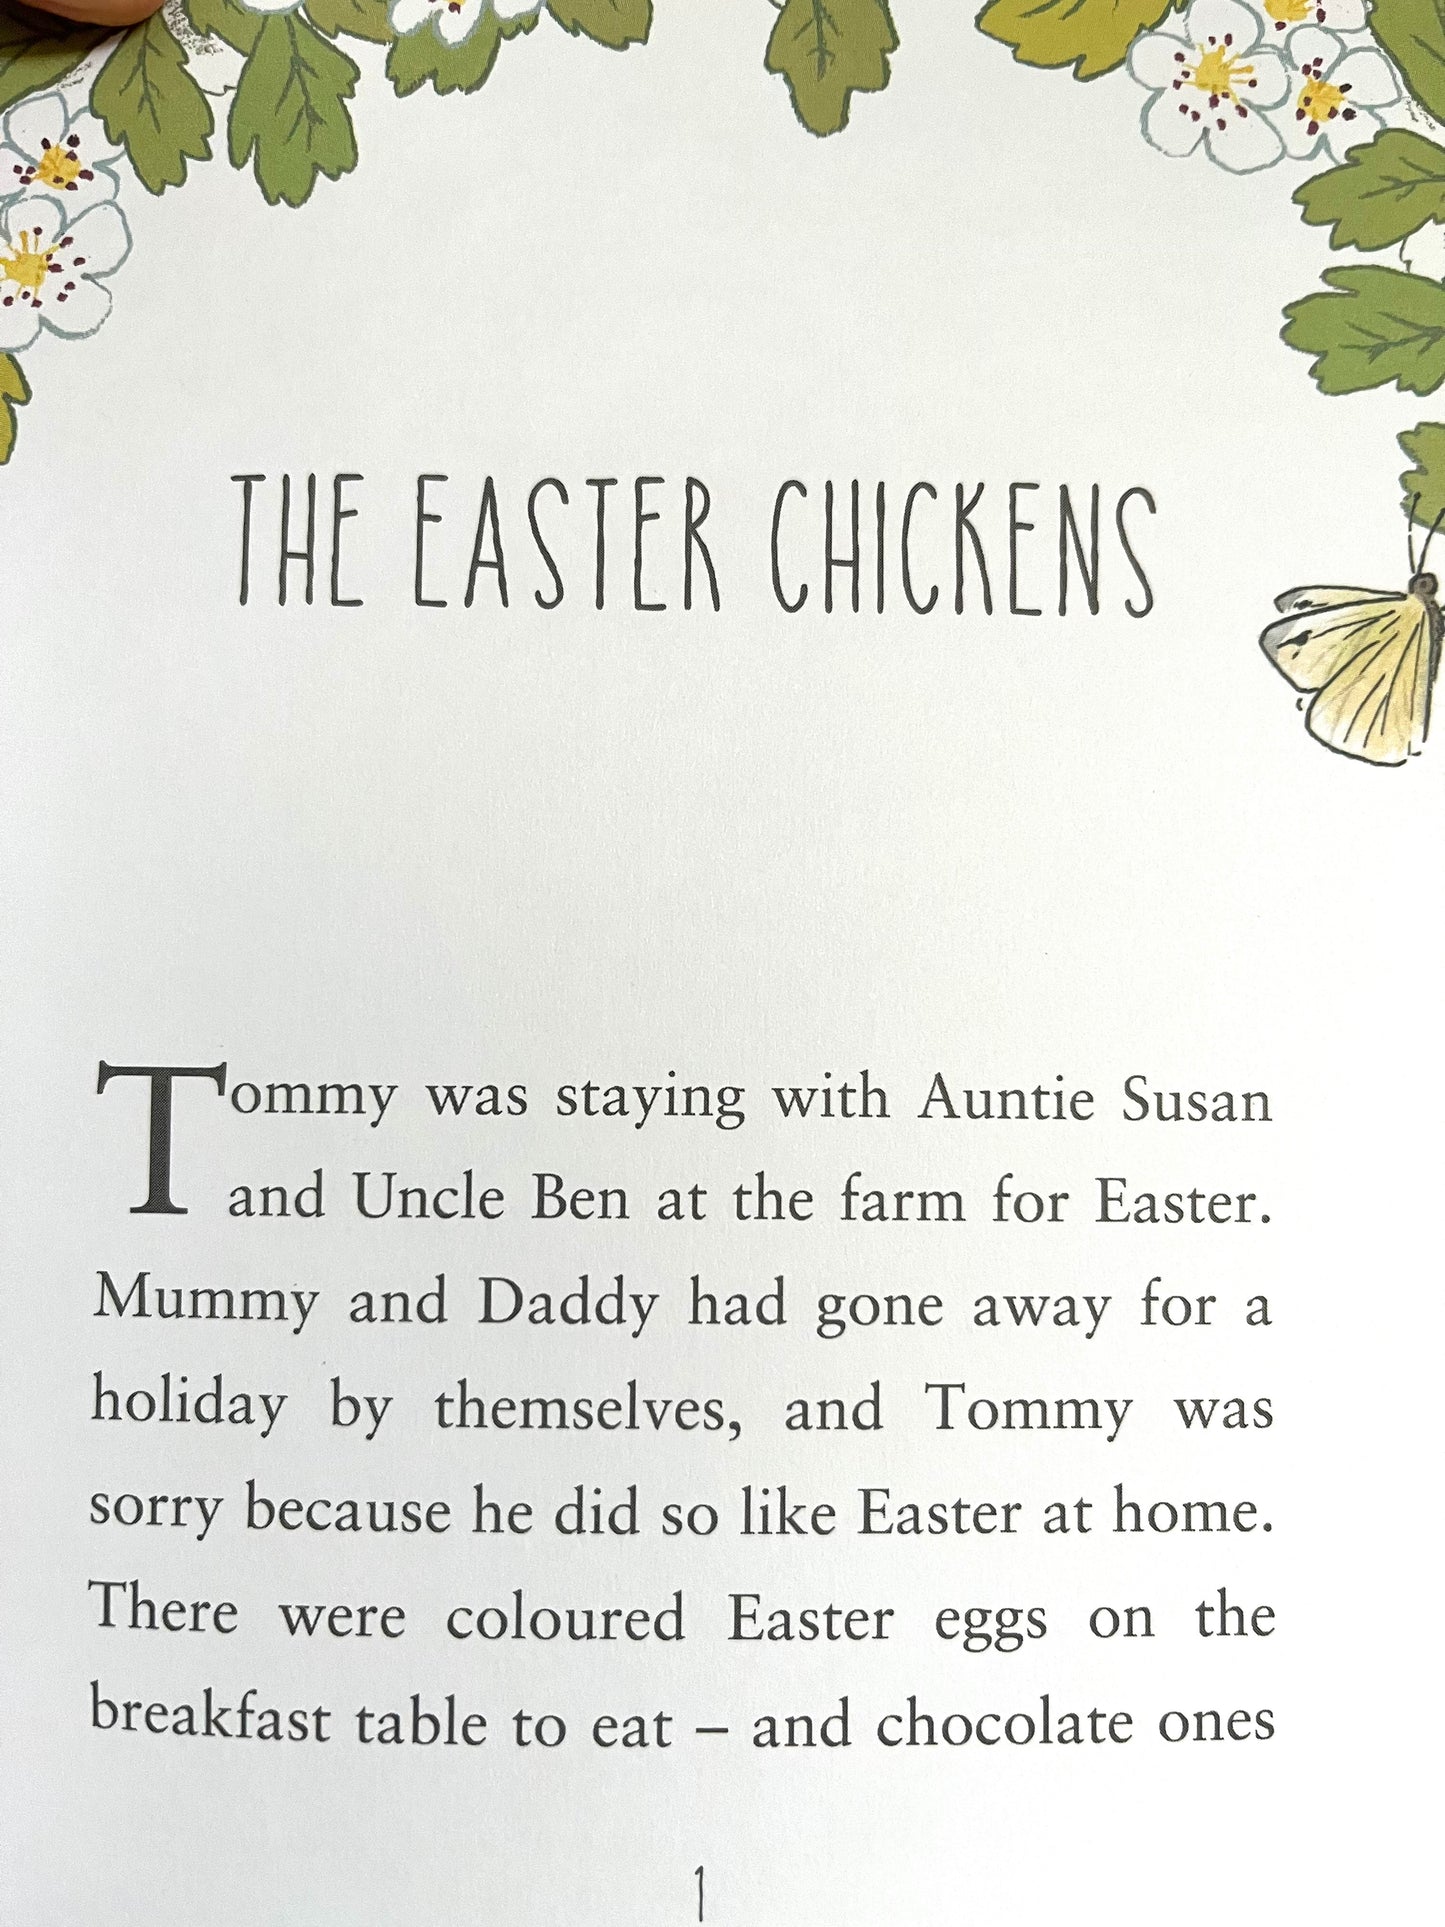 Children’s Picture Book - Enid Blyton’s STORIES OF NATURE´S TREASURES